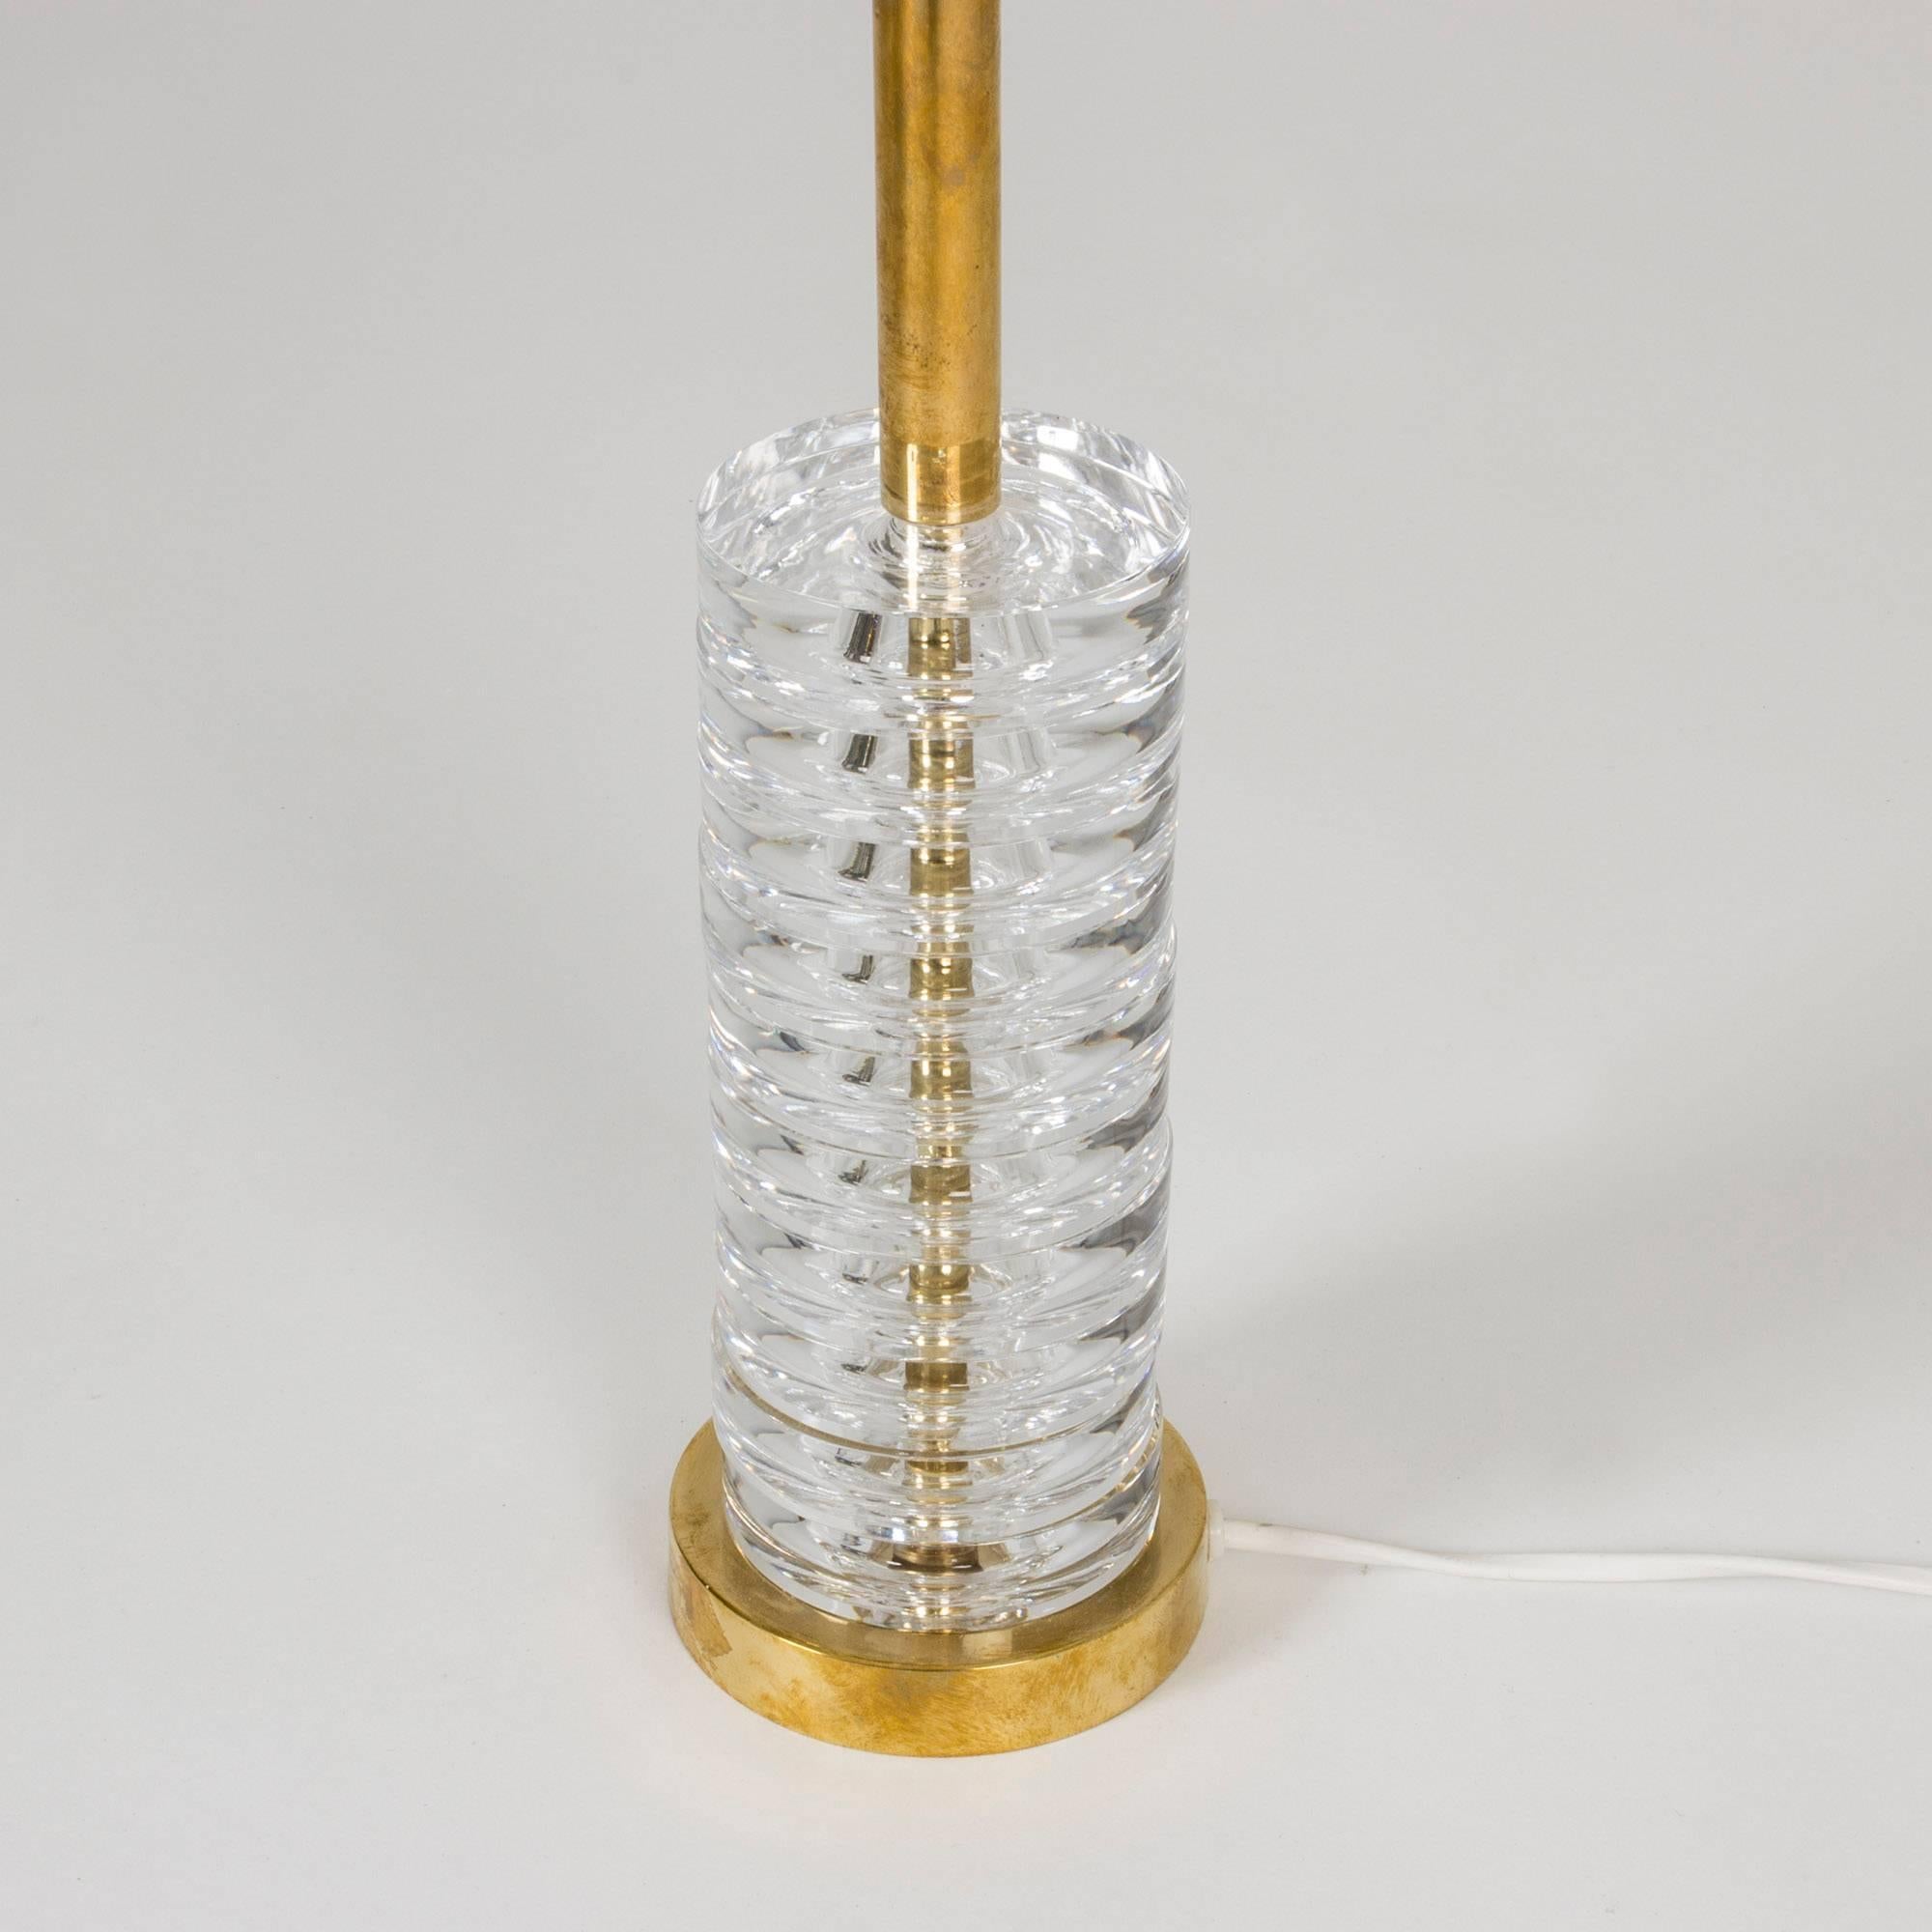 Delectably elegant brass and crystal table lamp by Carl Fagerlund. The base is made from thick, clear stacked crystal discs around a brass centre bar.